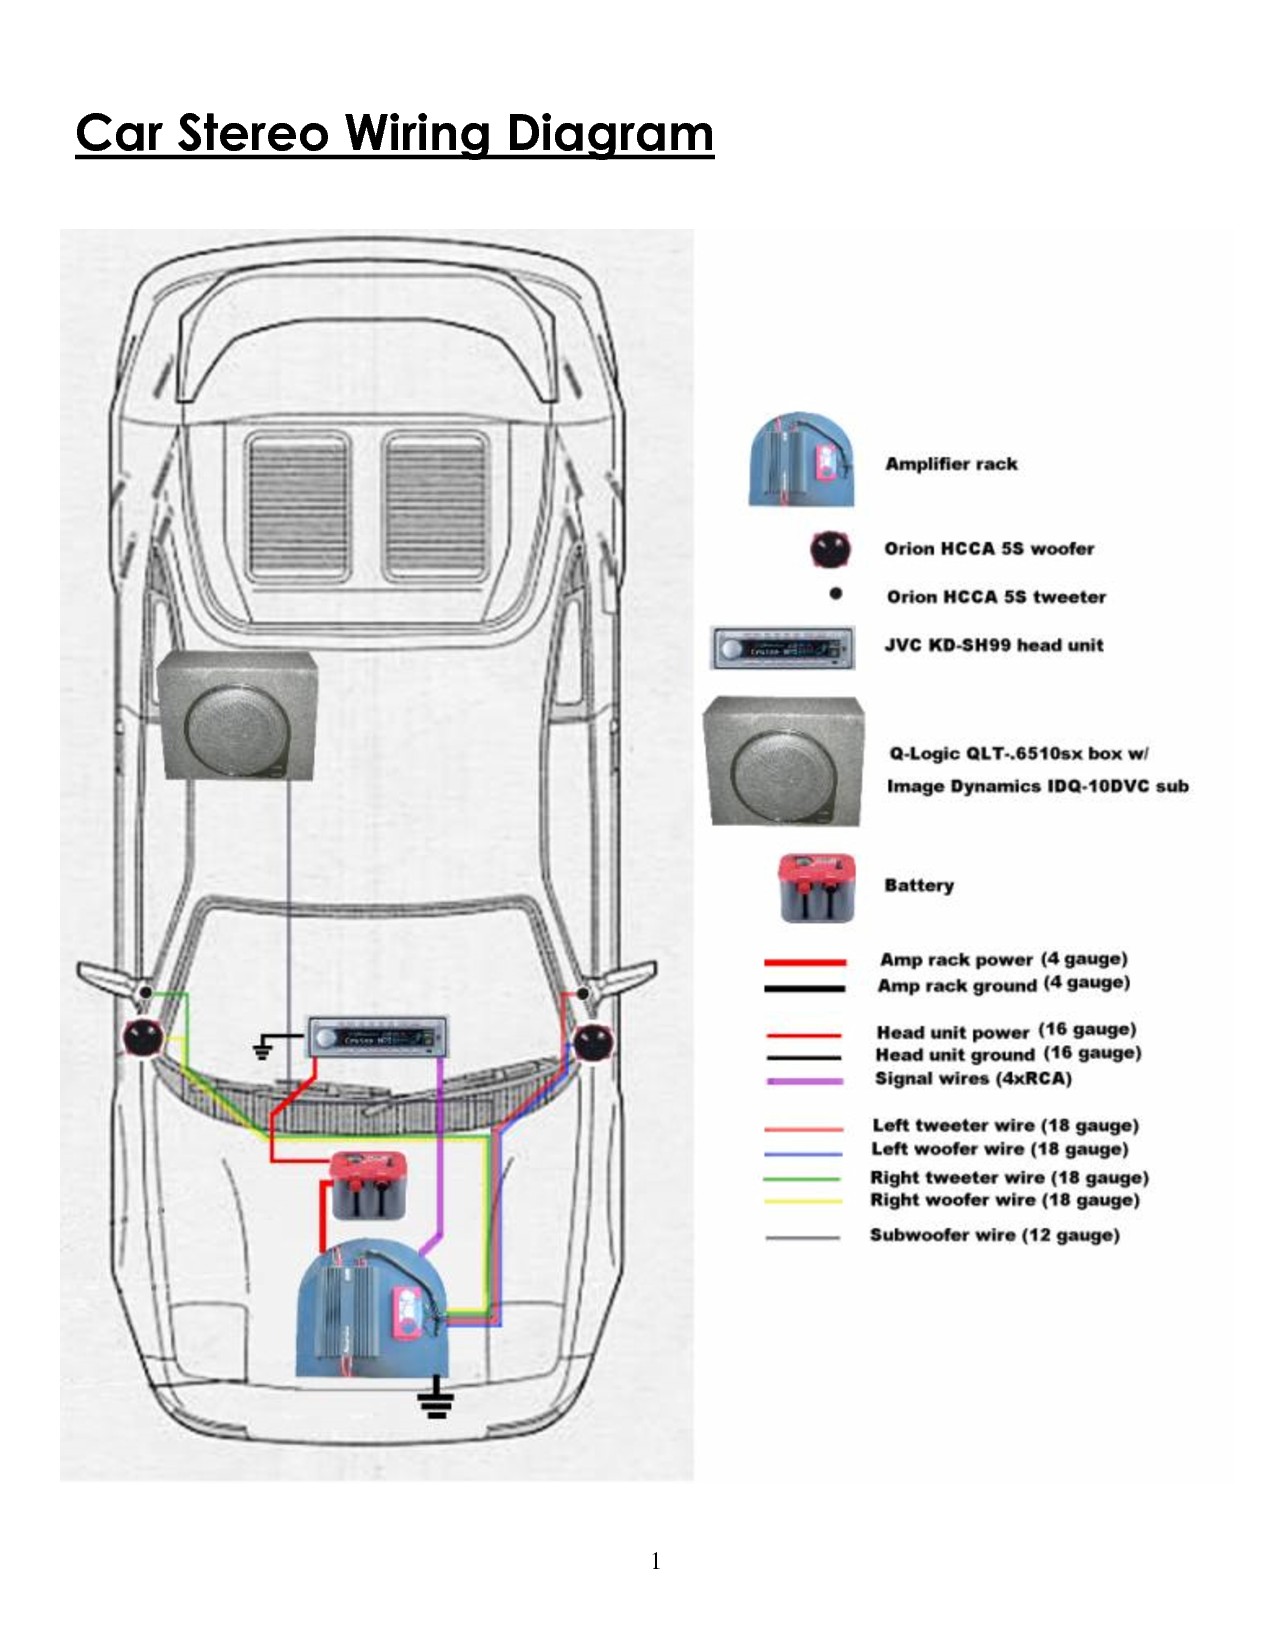 Car Stereo System Diagram Car Audio Wiring Diagram Pioneer Radio Colors Nissan Stereo Harness Of Car Stereo System Diagram